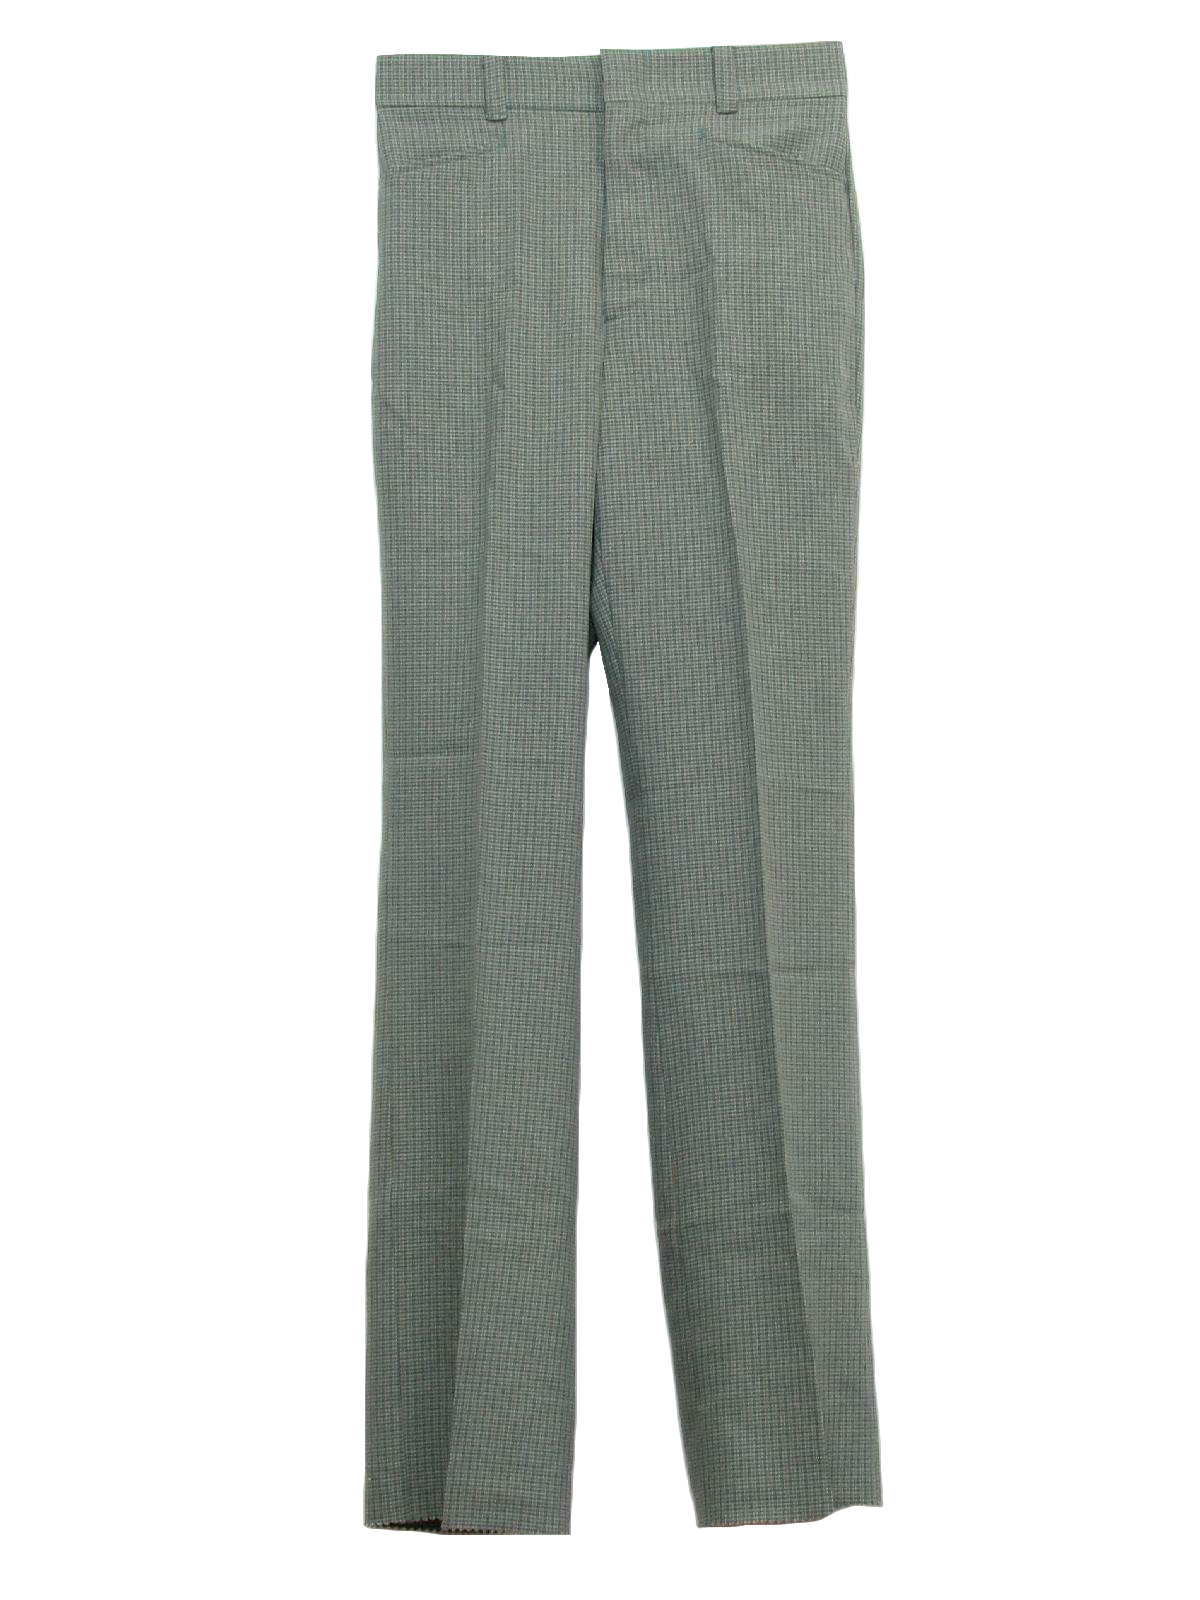 1970's Retro Flared Pants / Flares: 70s -no label- Mens grey background ...